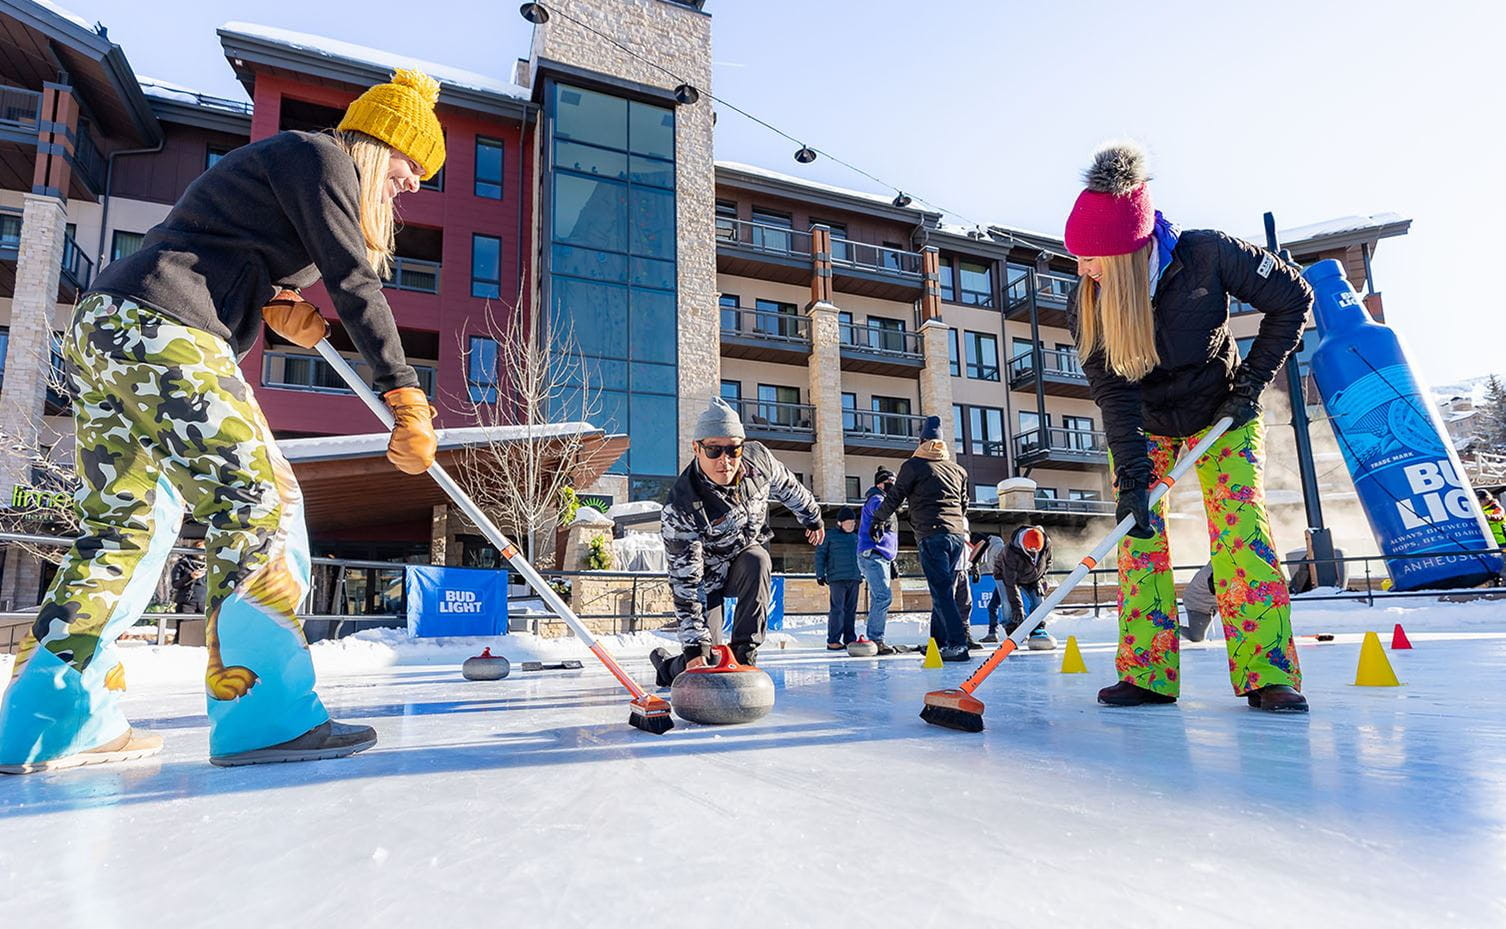 People curling in snowmass base village. 